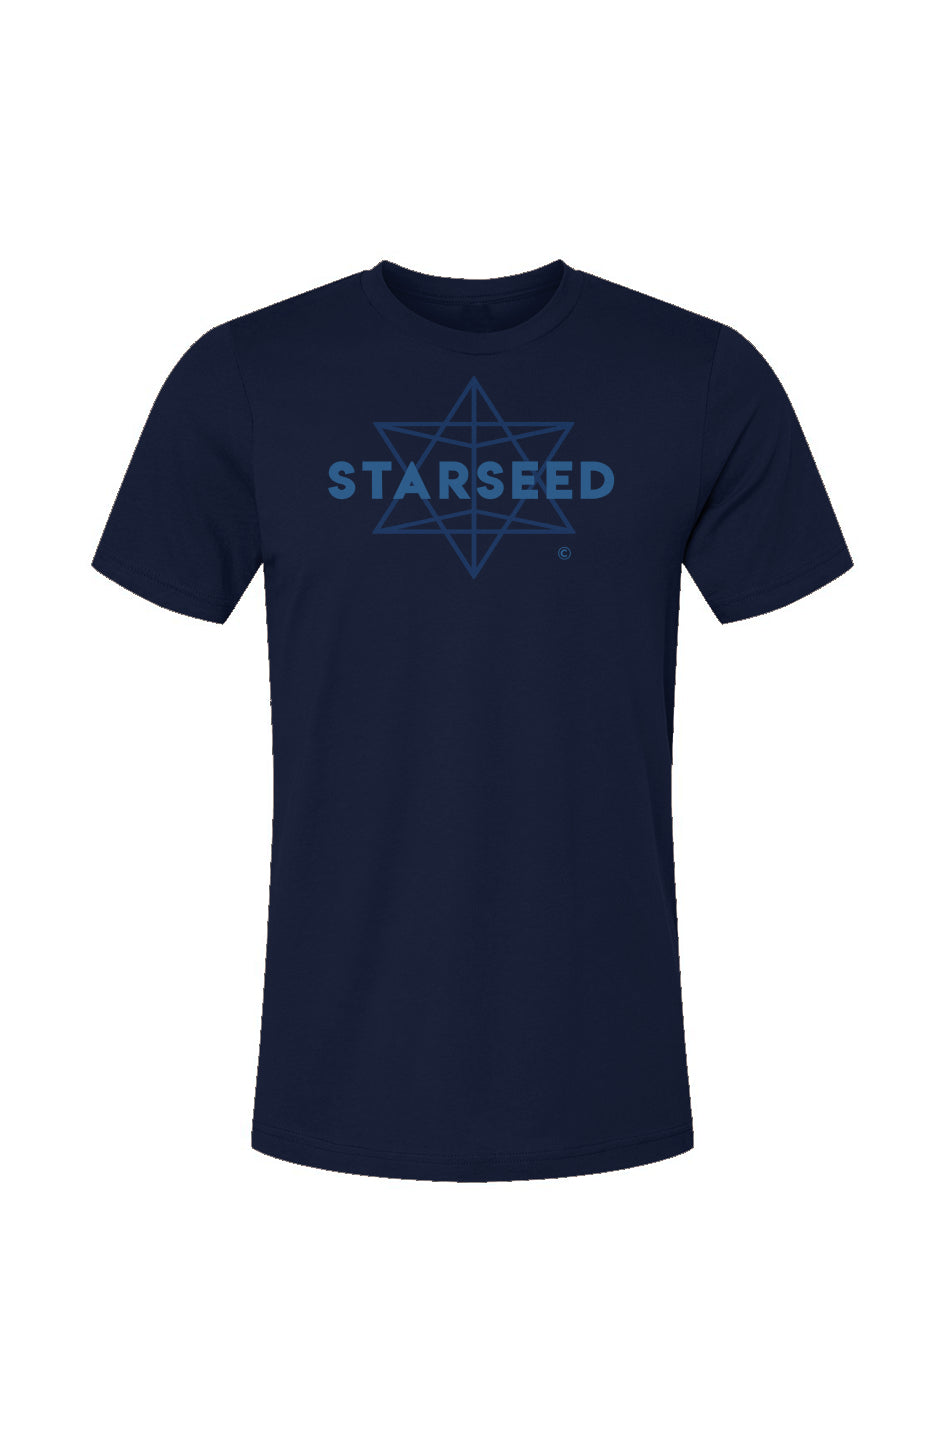 the starseed collection: monochromatic unisex t-shirt